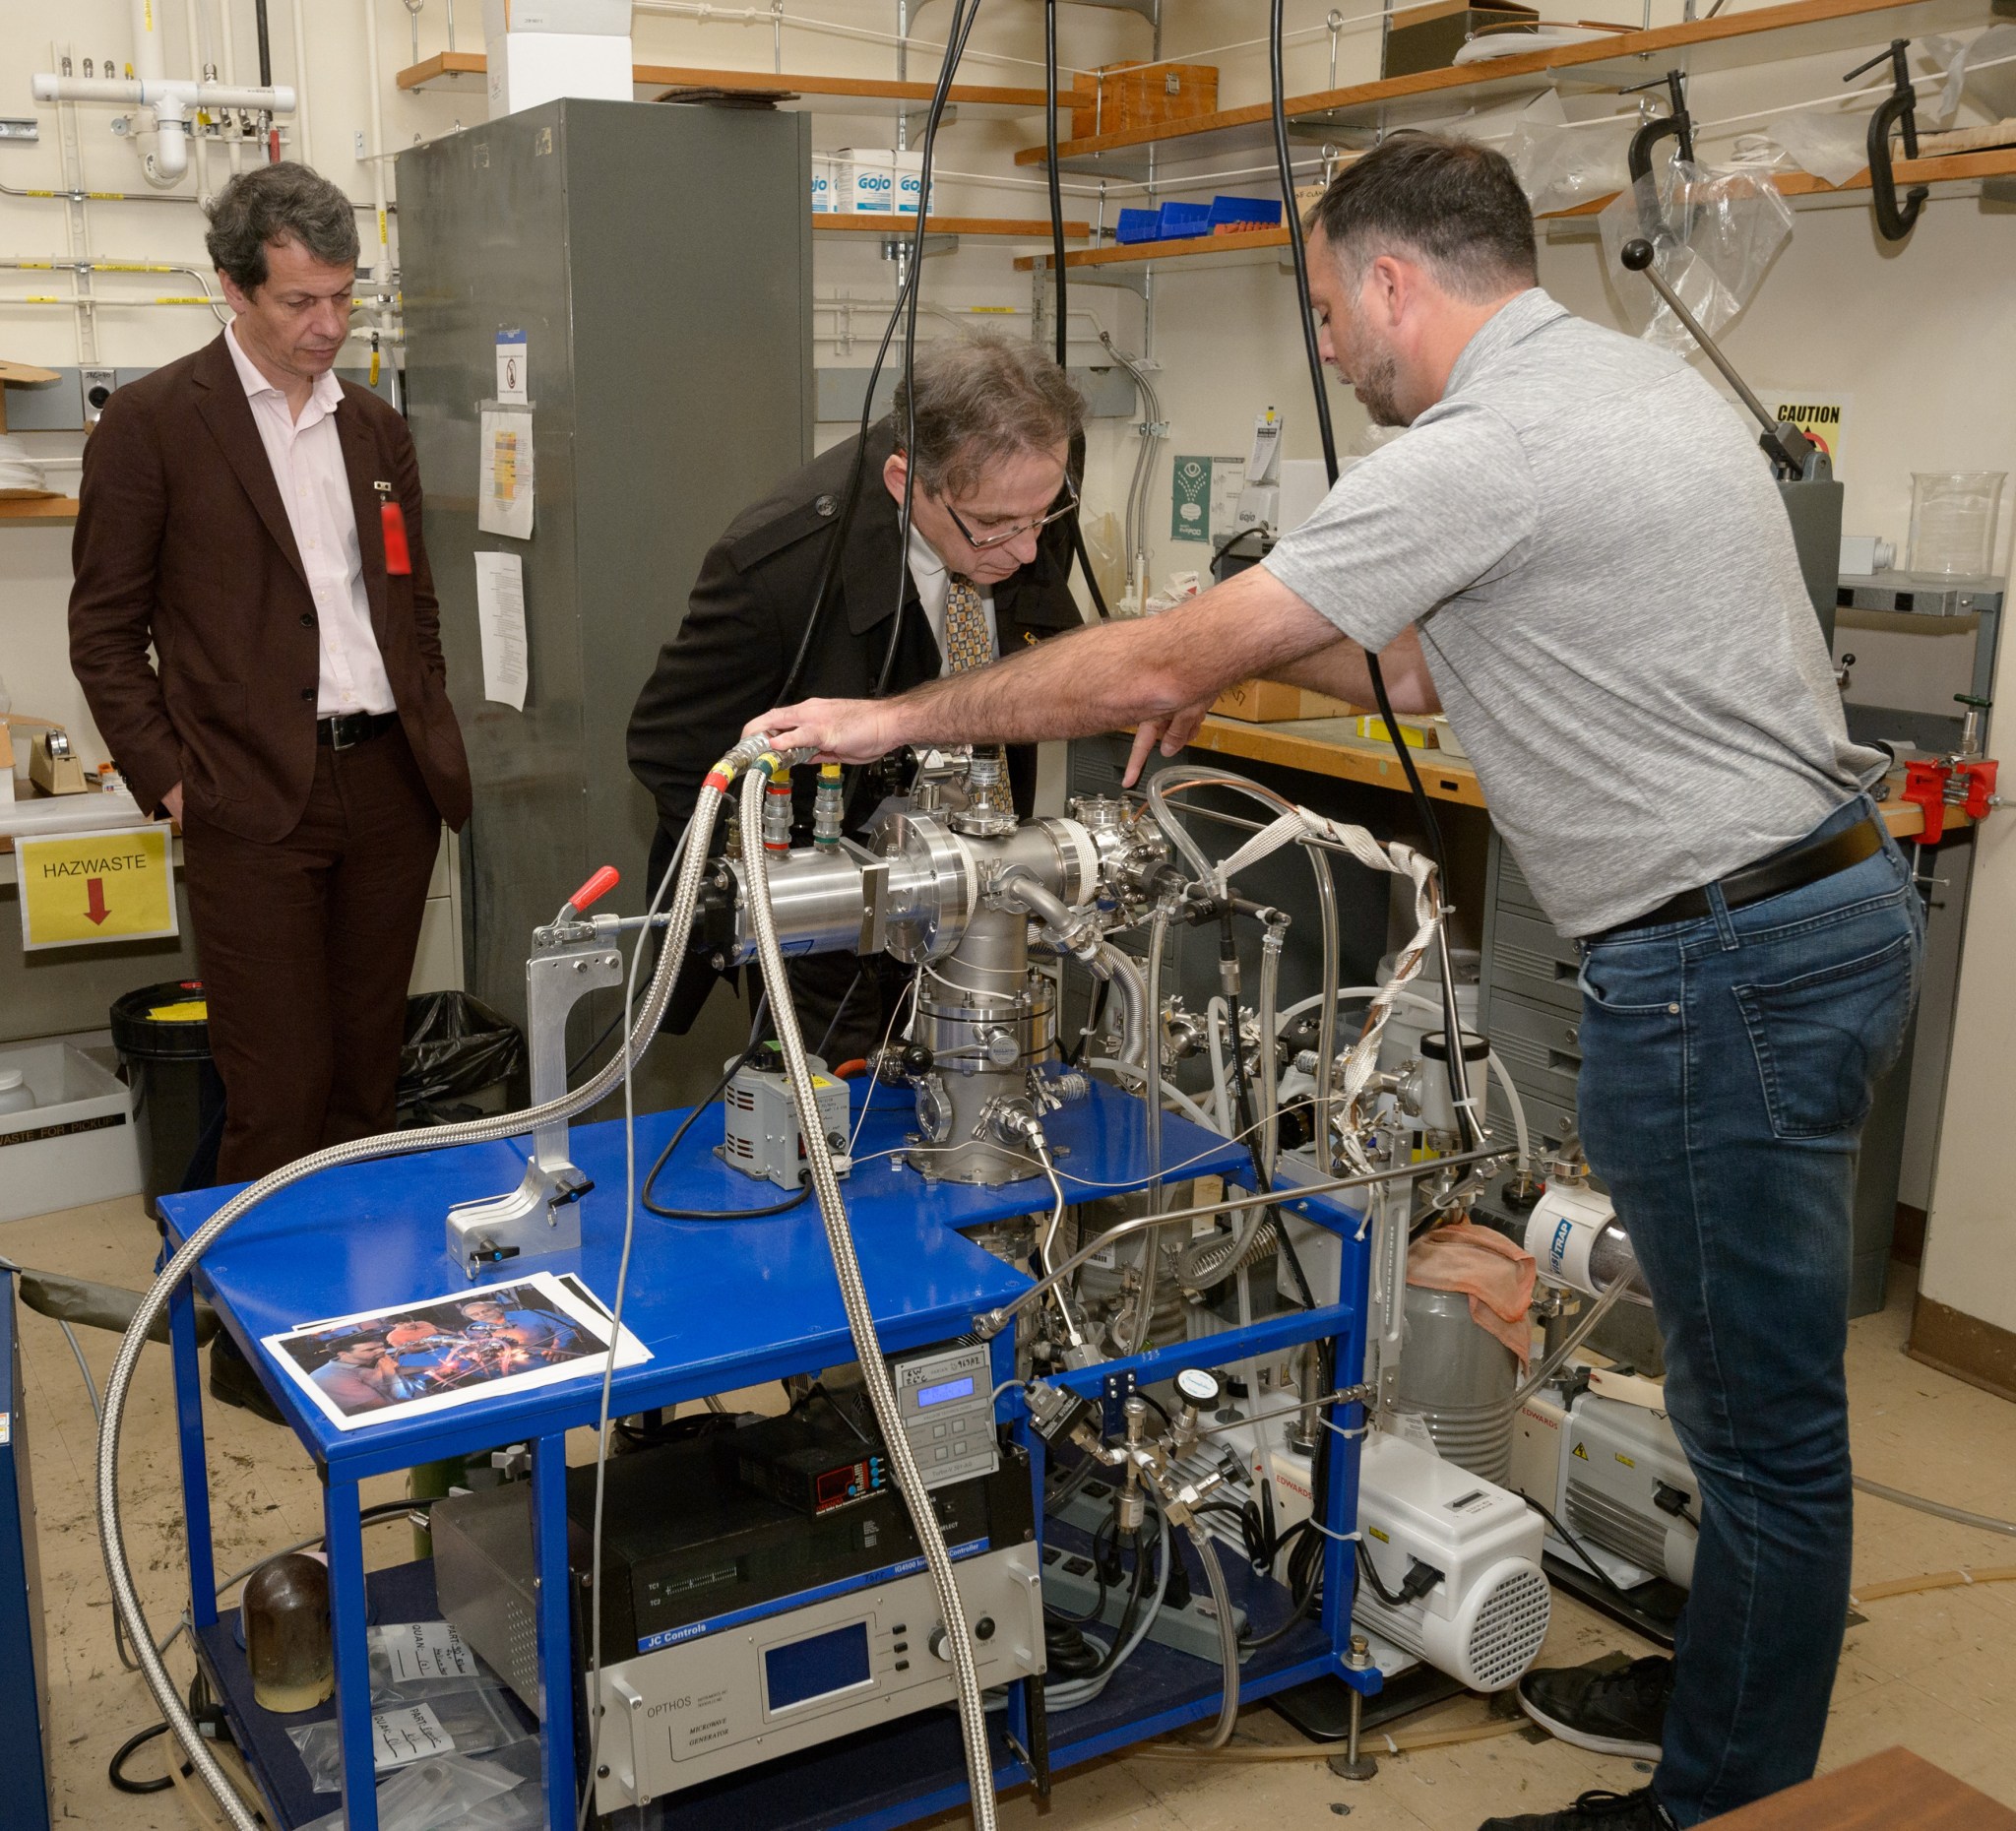 Three men in a room inspect a machine on a blue rolling cart. The machine has tubes and pipes, one man is bent over to get a close look.